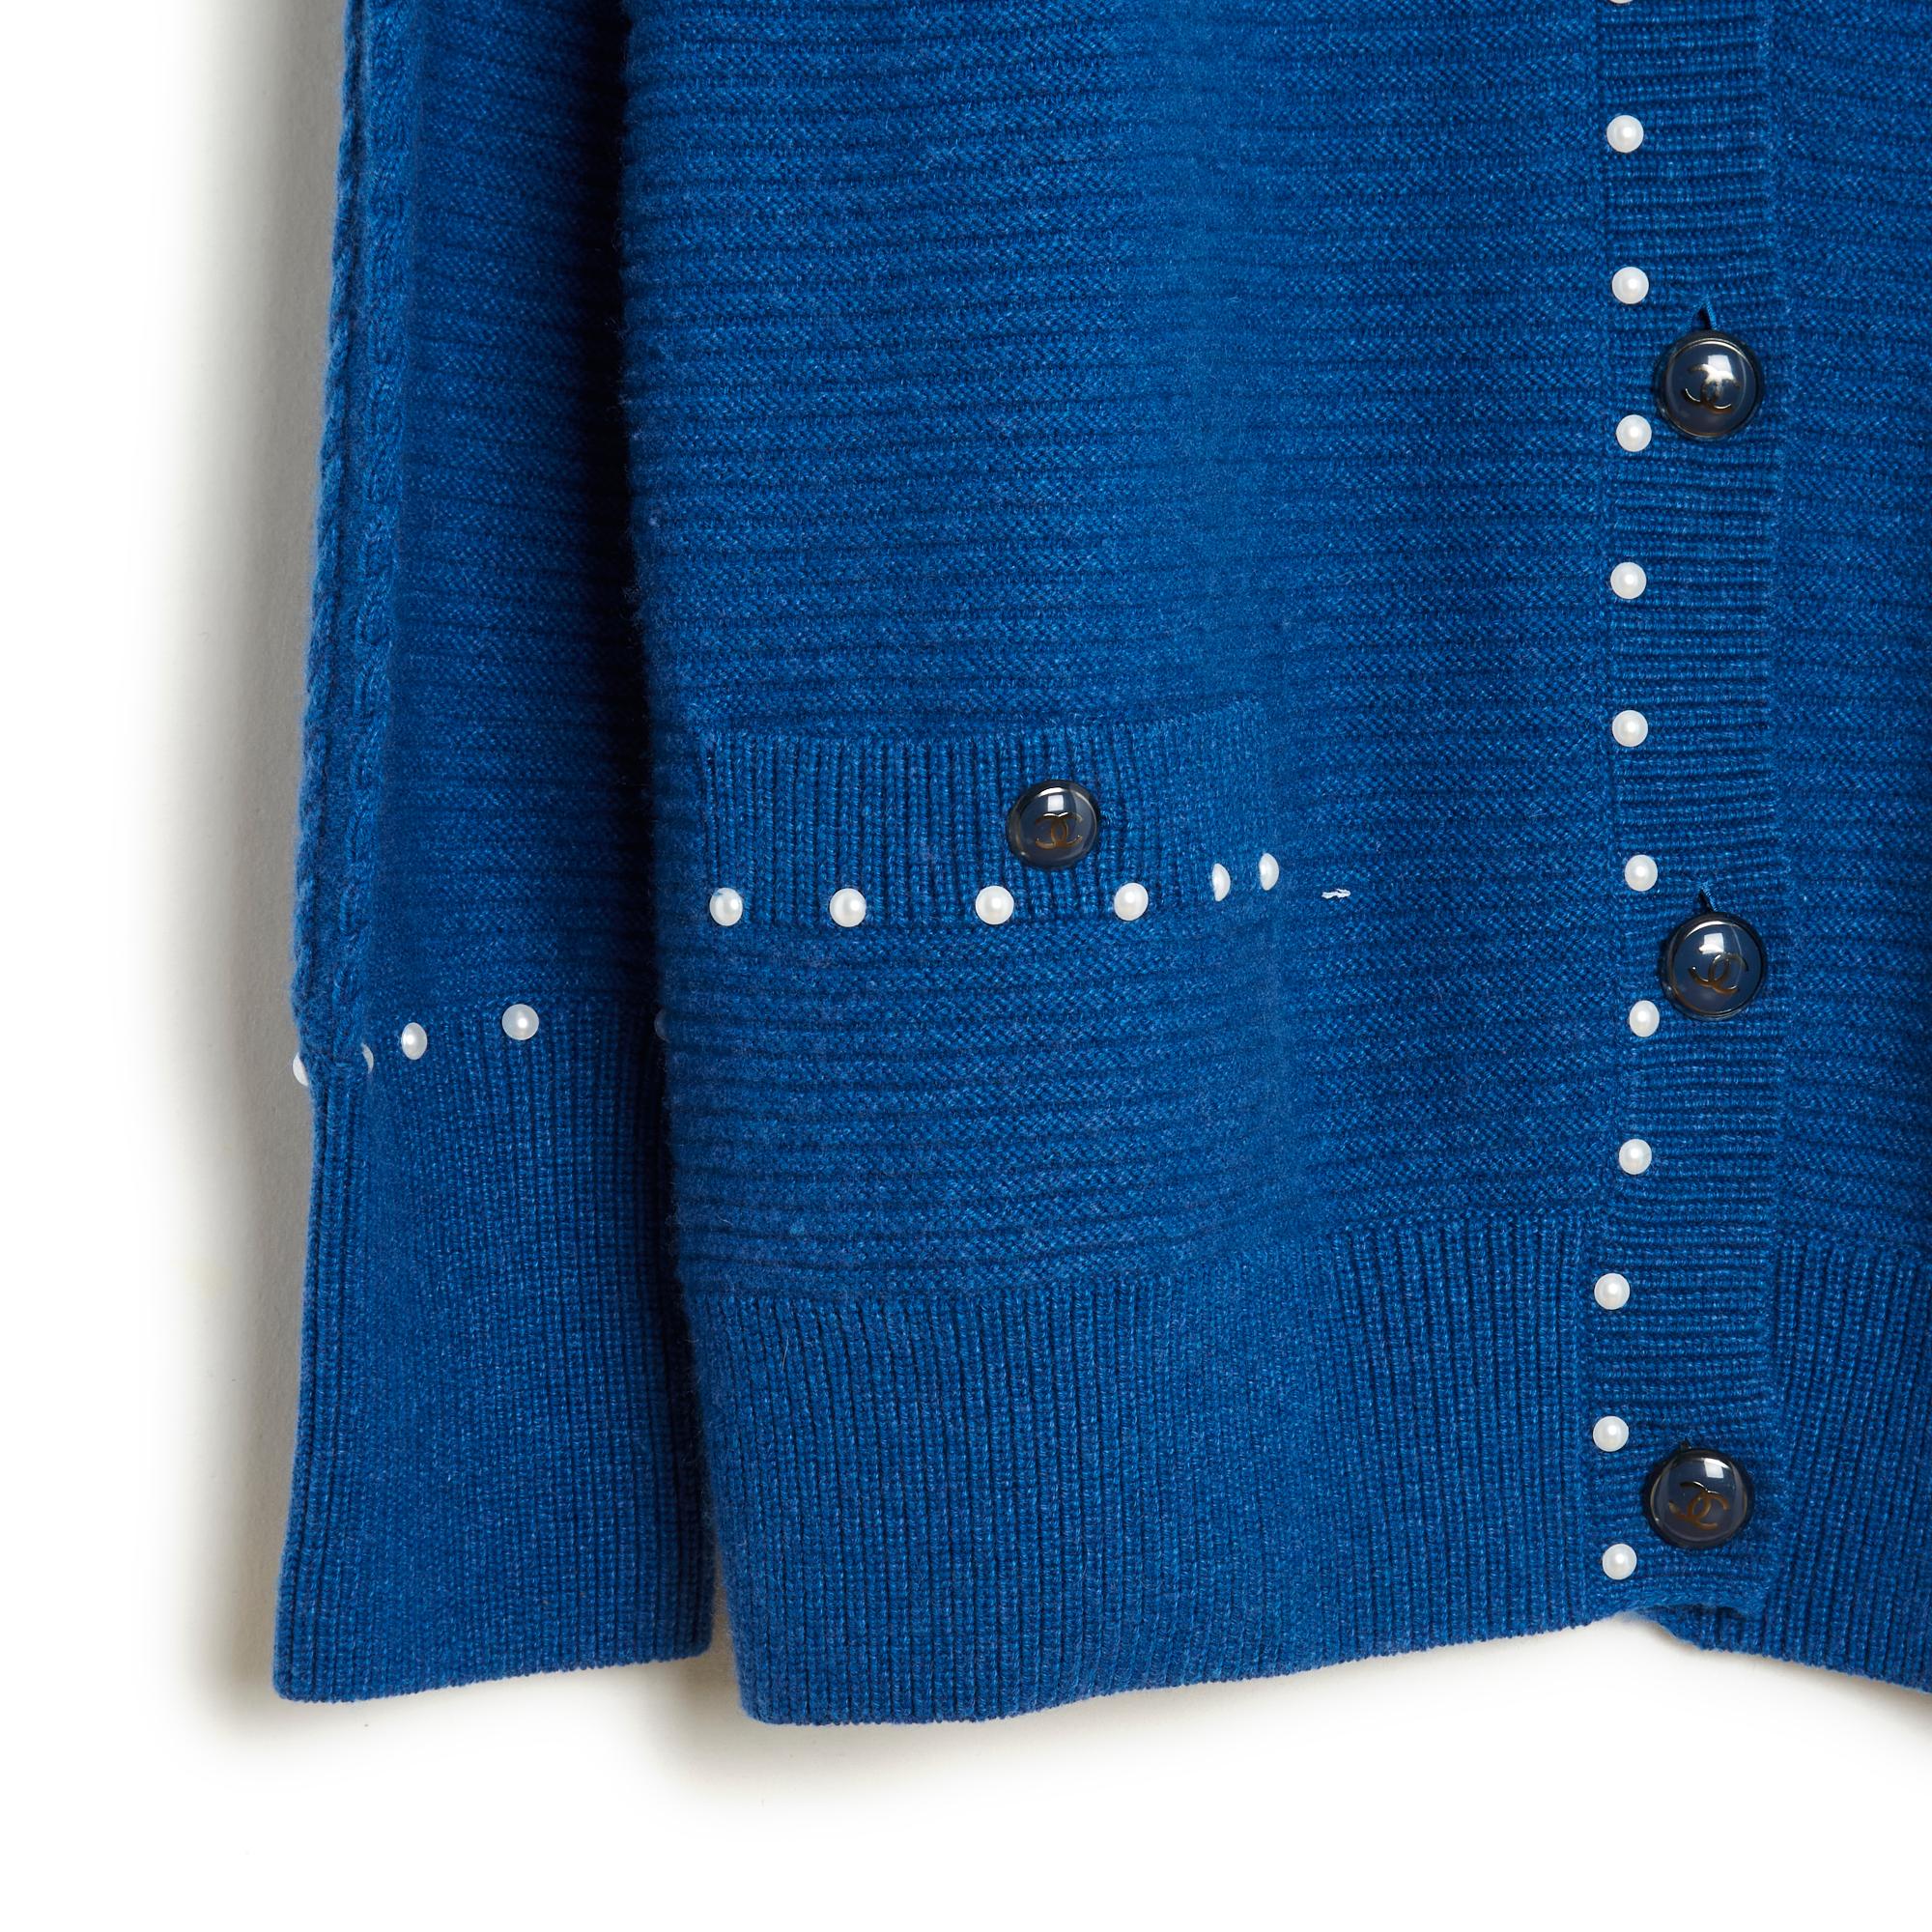 Chanel cardigan circa 2016 in cotton knit (53%) and cashmere with royal blue twists, closed V-neck and pockets closed with blackened silver metal buttons, bordered with half fancy pearls all around, ribbed finish. Size 48FR (perfect from 38 to 46):